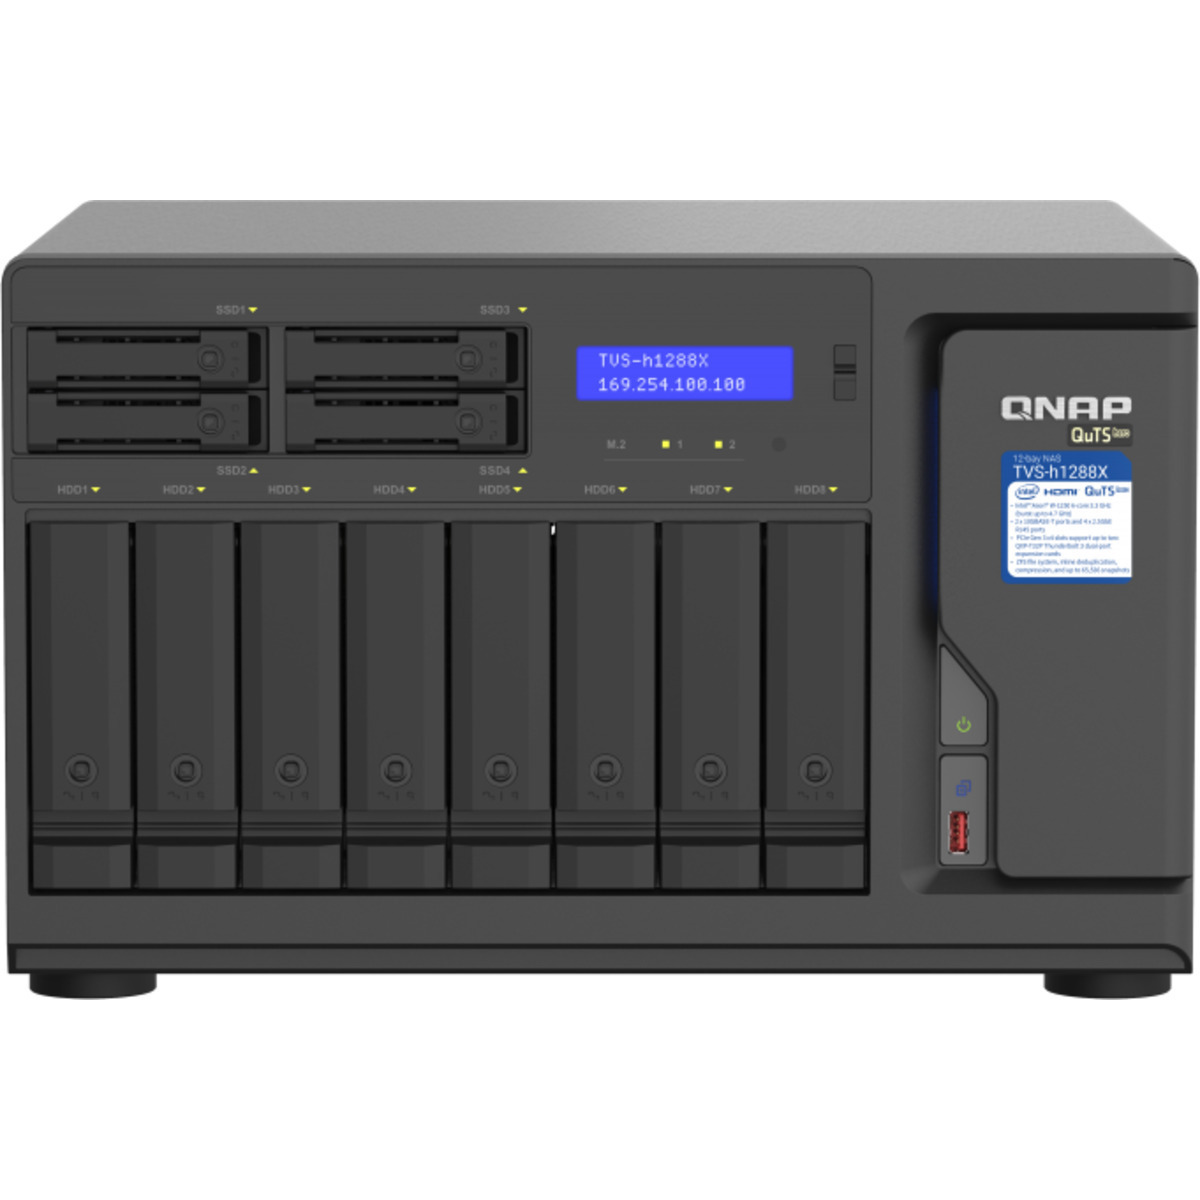 QNAP TVS-h1288X QuTS hero NAS 64tb 8+4-Bay Desktop Multimedia / Power User / Business NAS - Network Attached Storage Device 8x8tb Western Digital Red Plus WD80EFPX 3.5 7200rpm SATA 6Gb/s HDD NAS Class Drives Installed - Burn-In Tested TVS-h1288X QuTS hero NAS